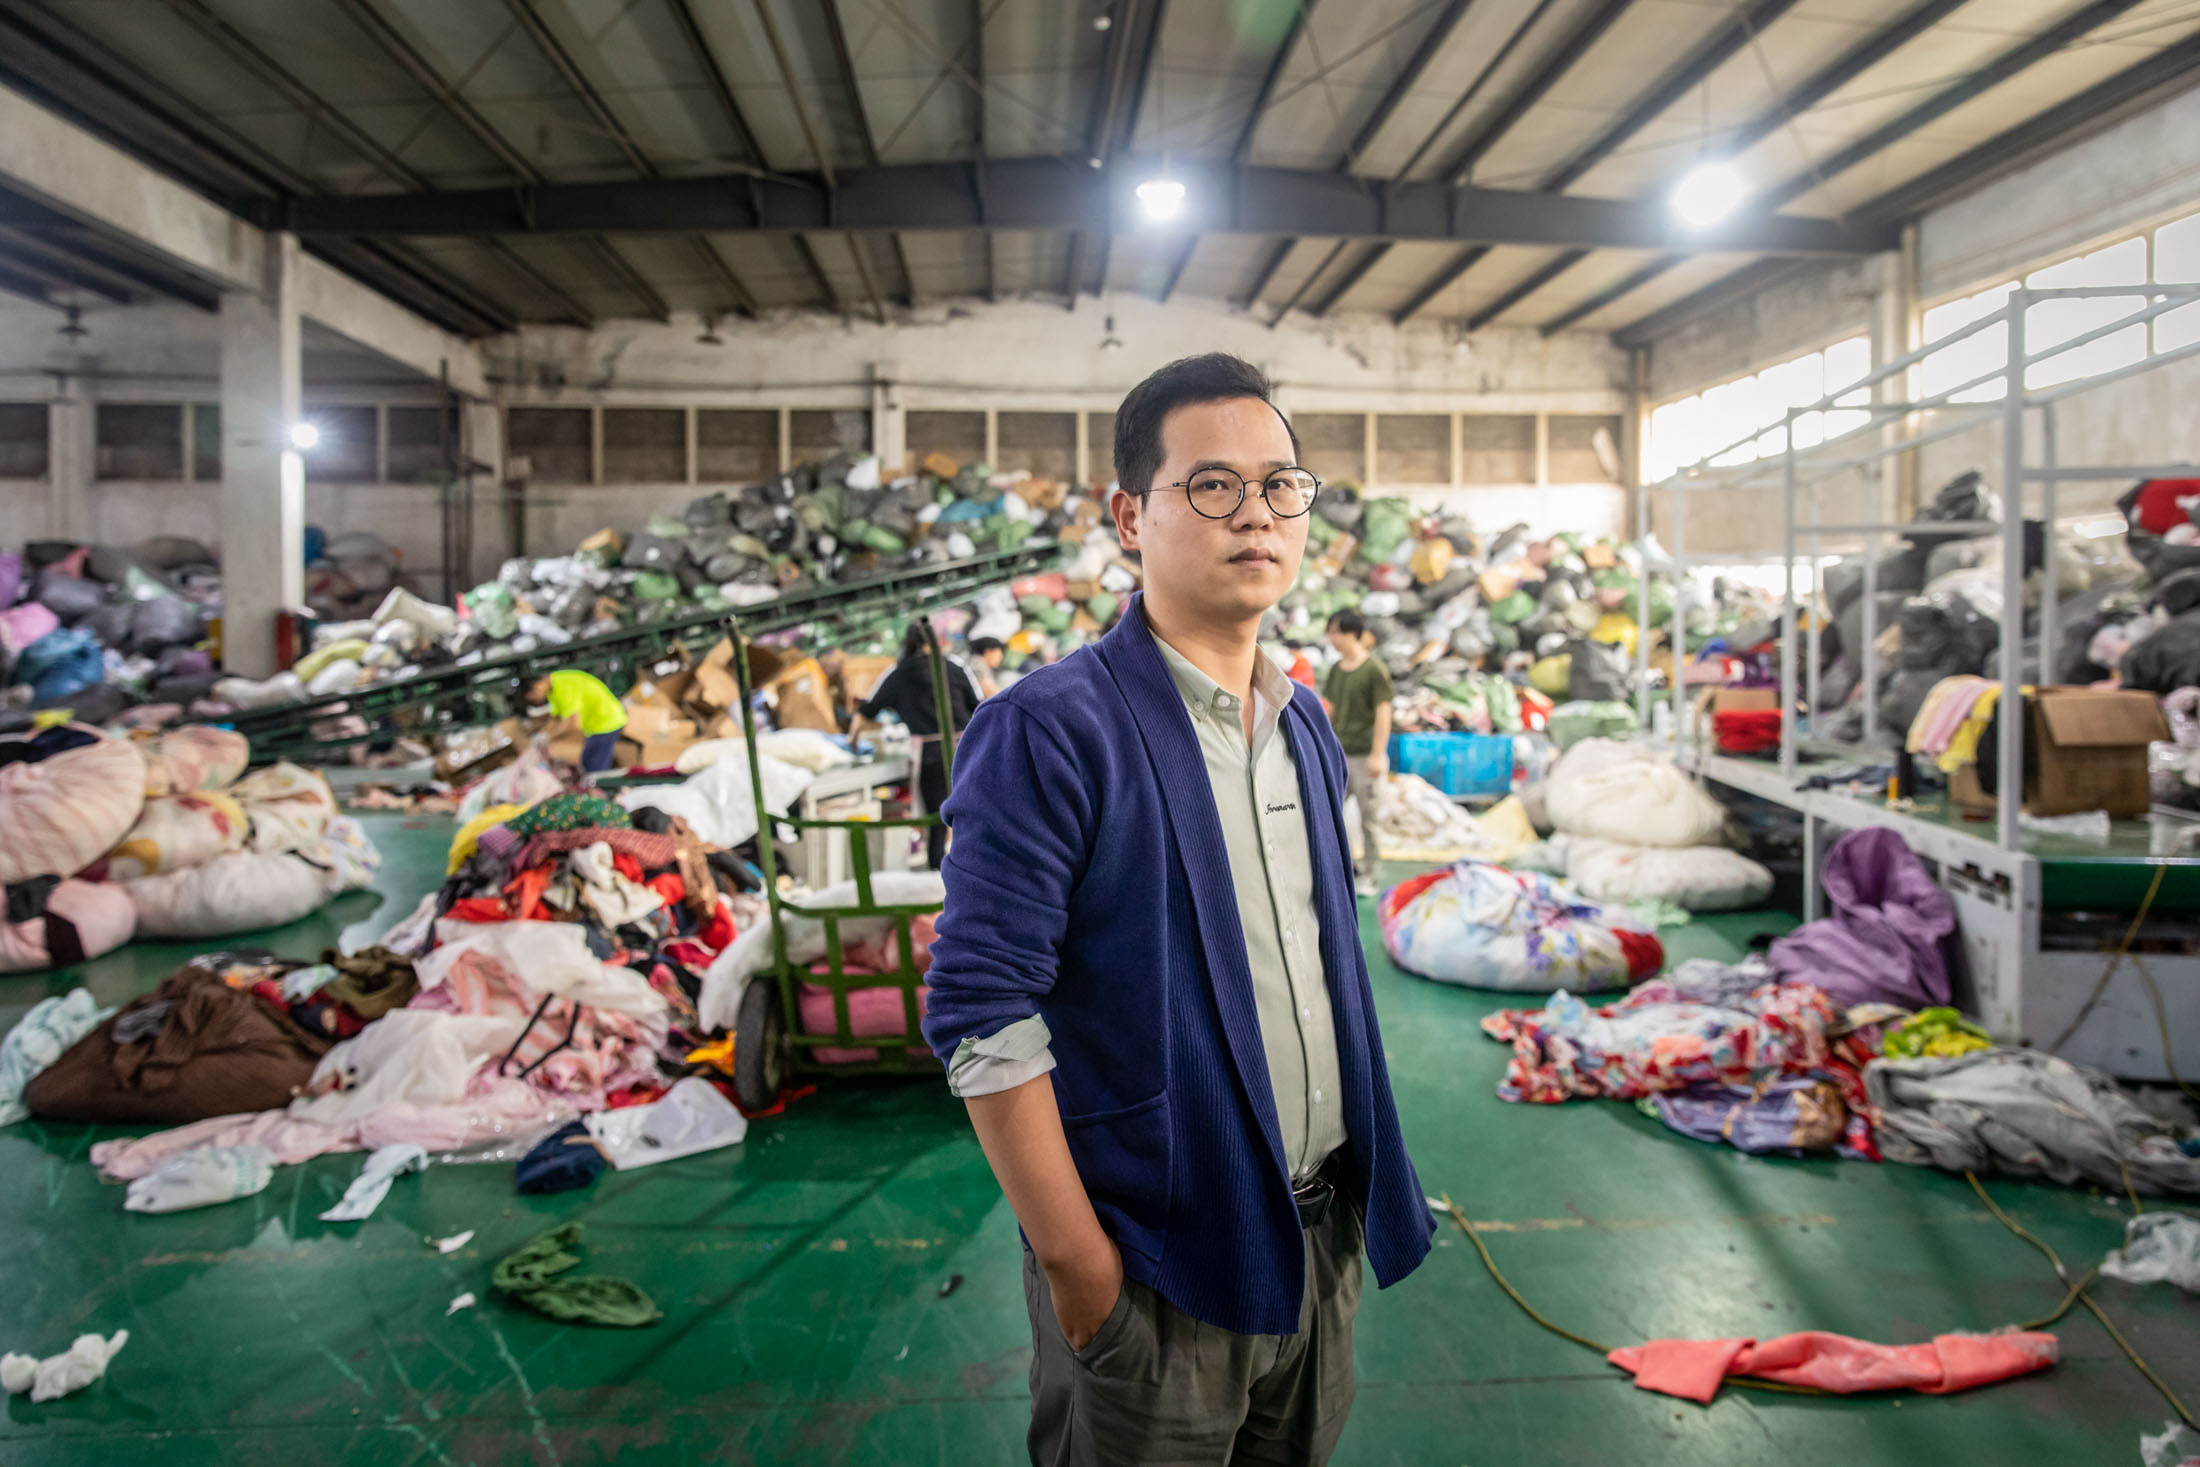 China to up its textile recycling capability - Chinadaily.com.cn